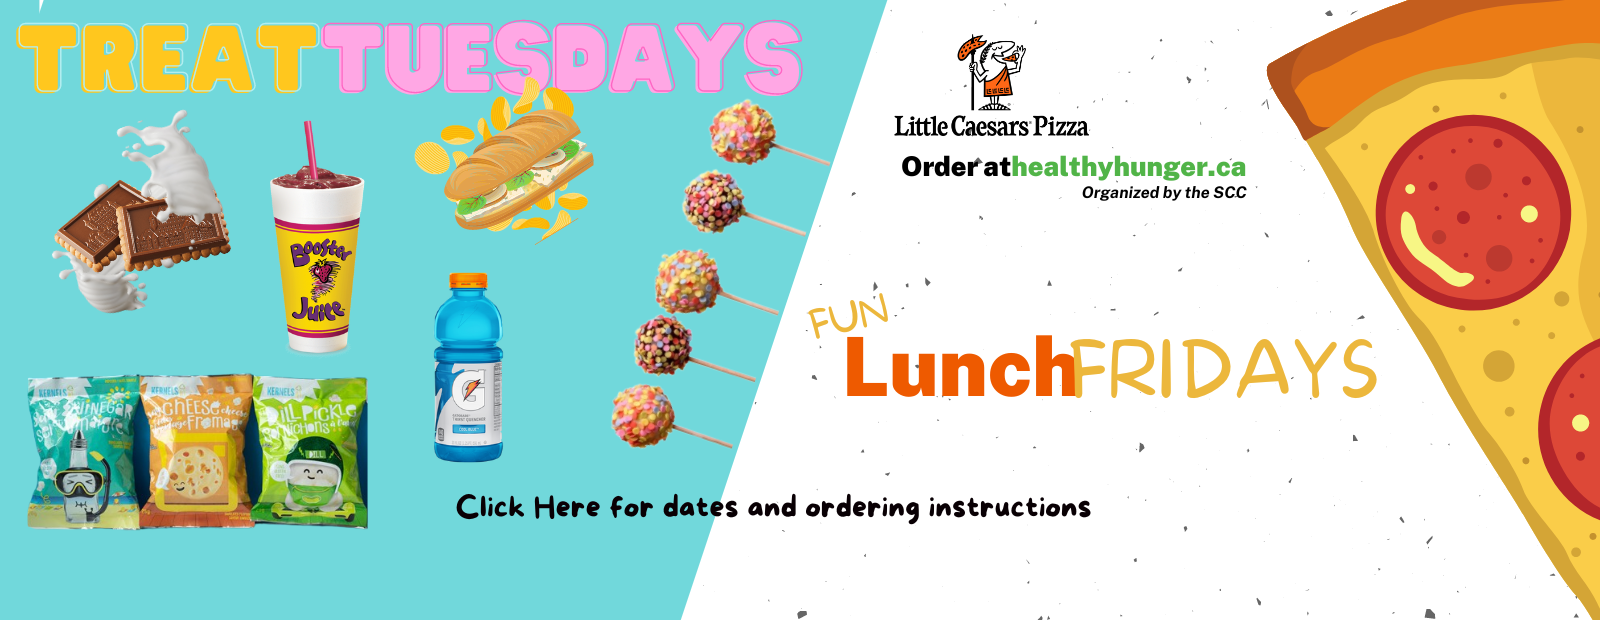 Treat Tuesdays and Fun Lunch Fridays